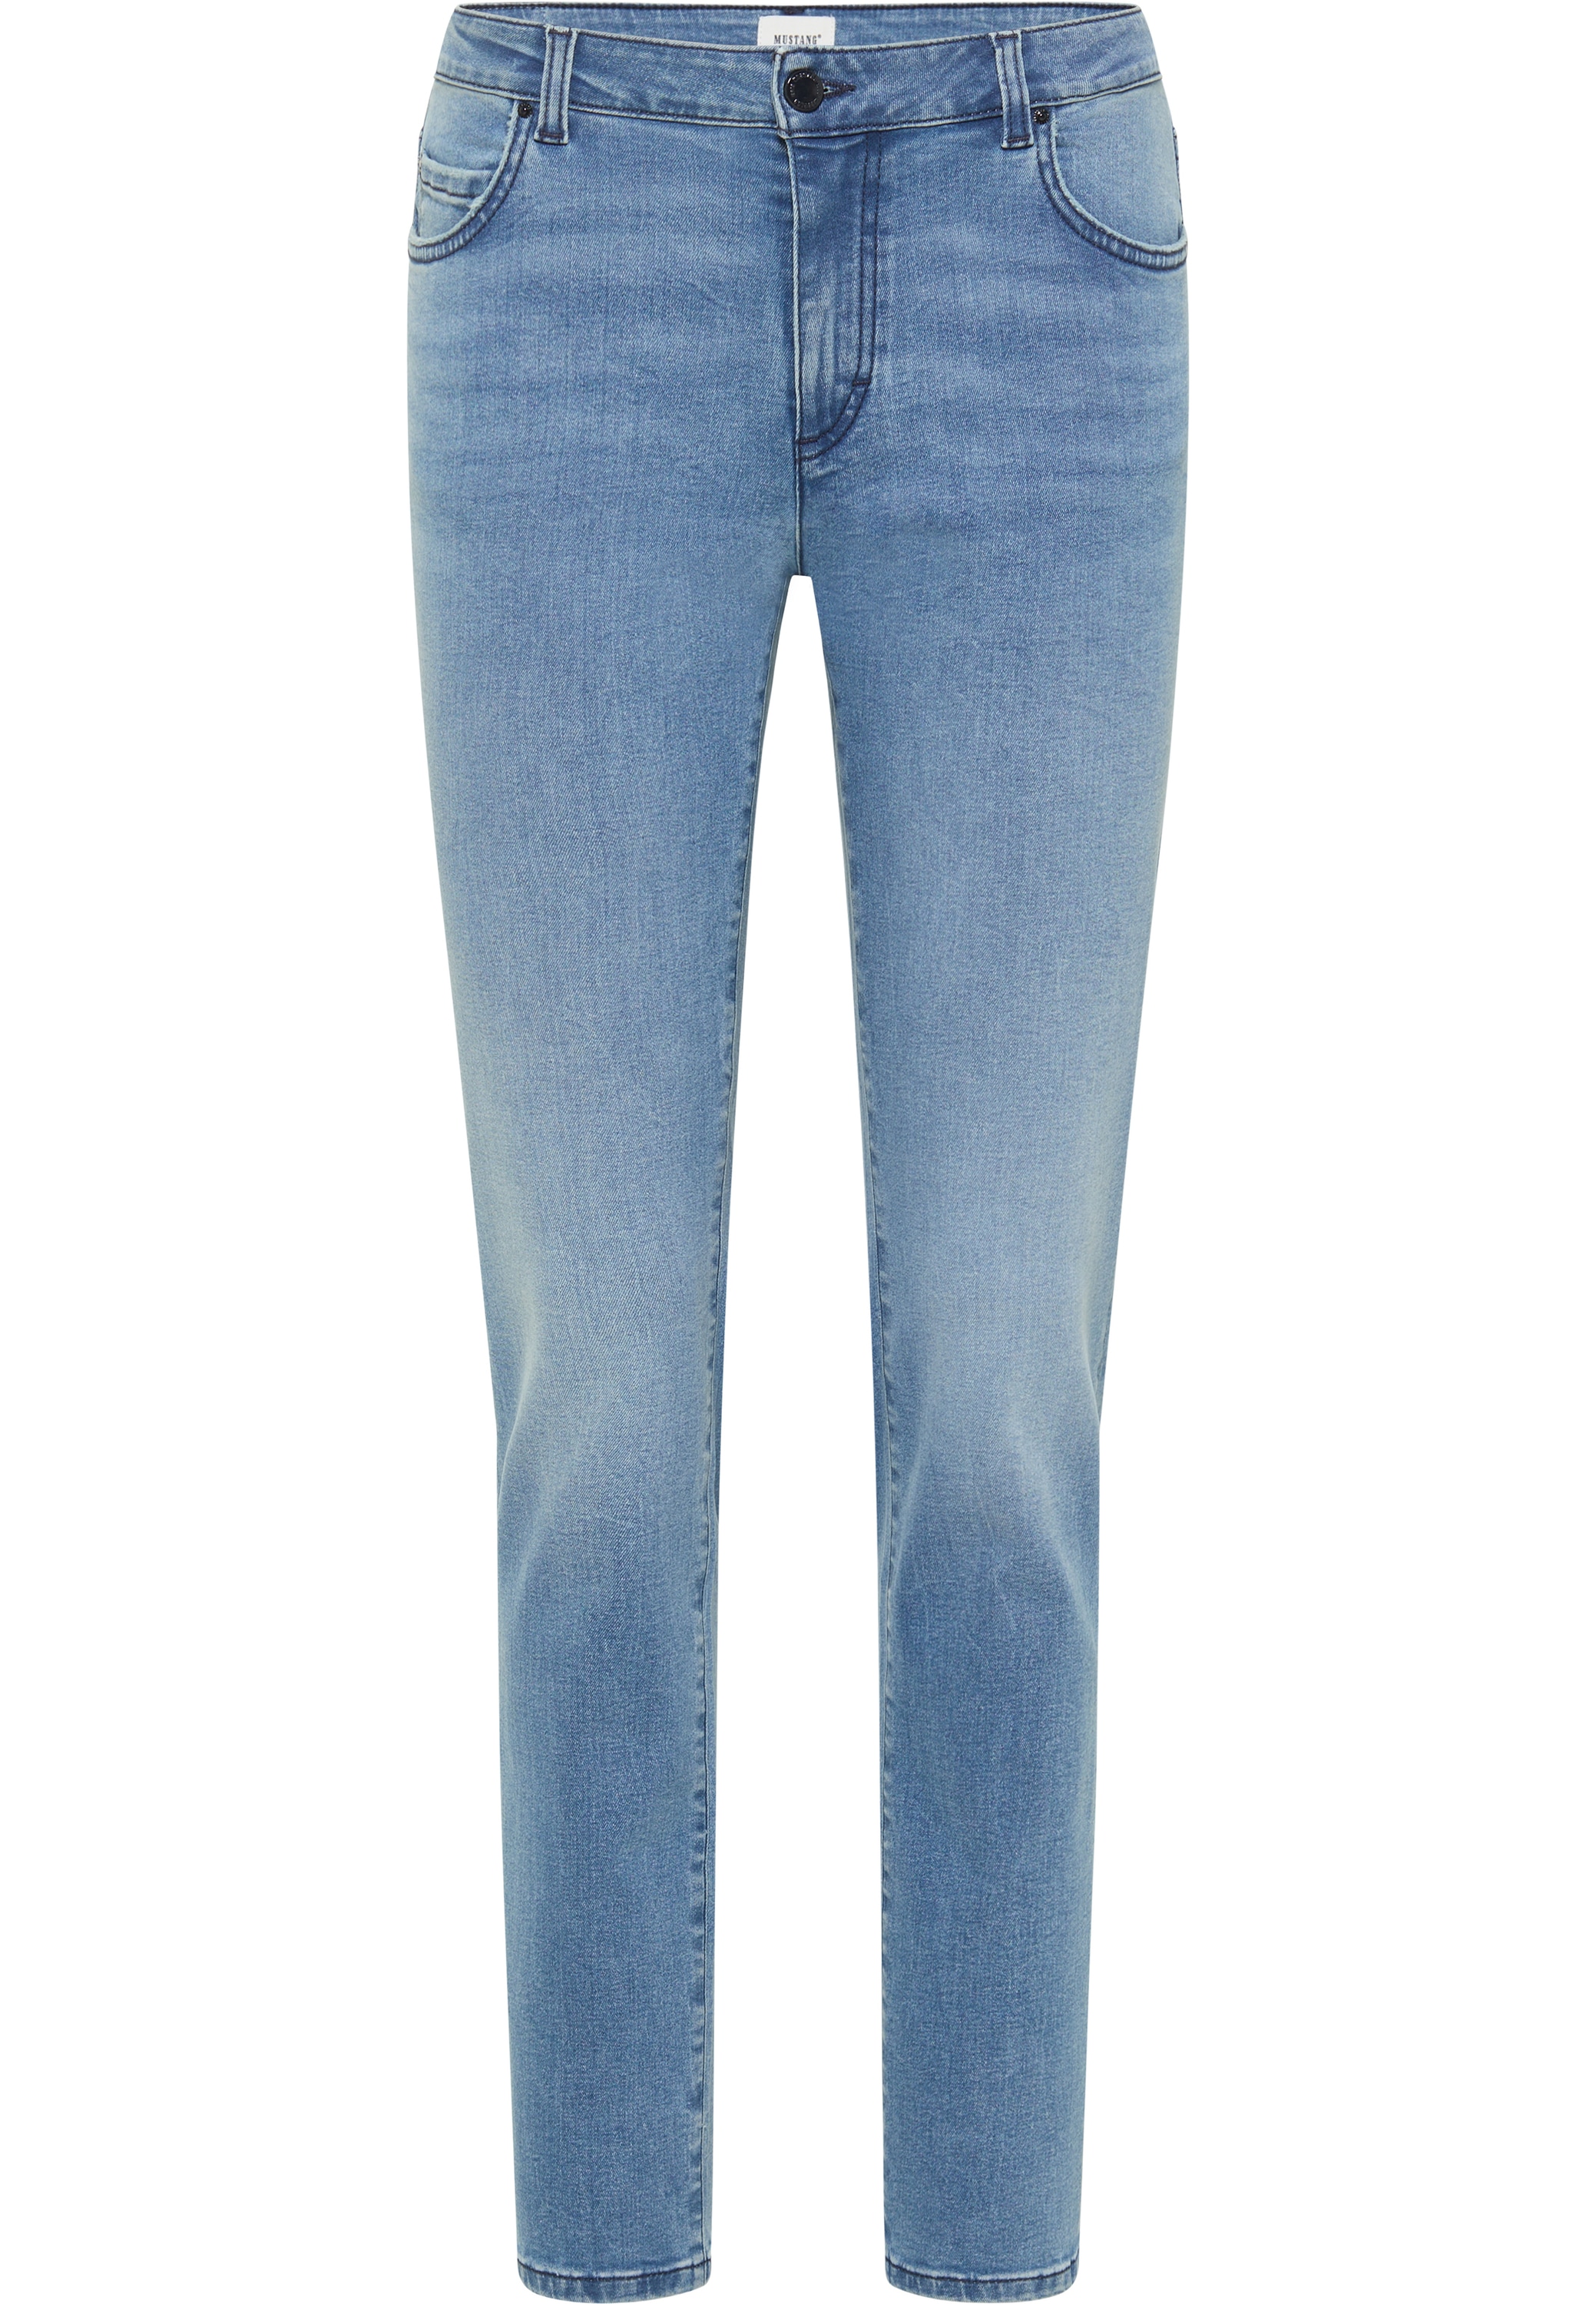 5-Pocket-Hose »Style Crosby Relaxed Slim«